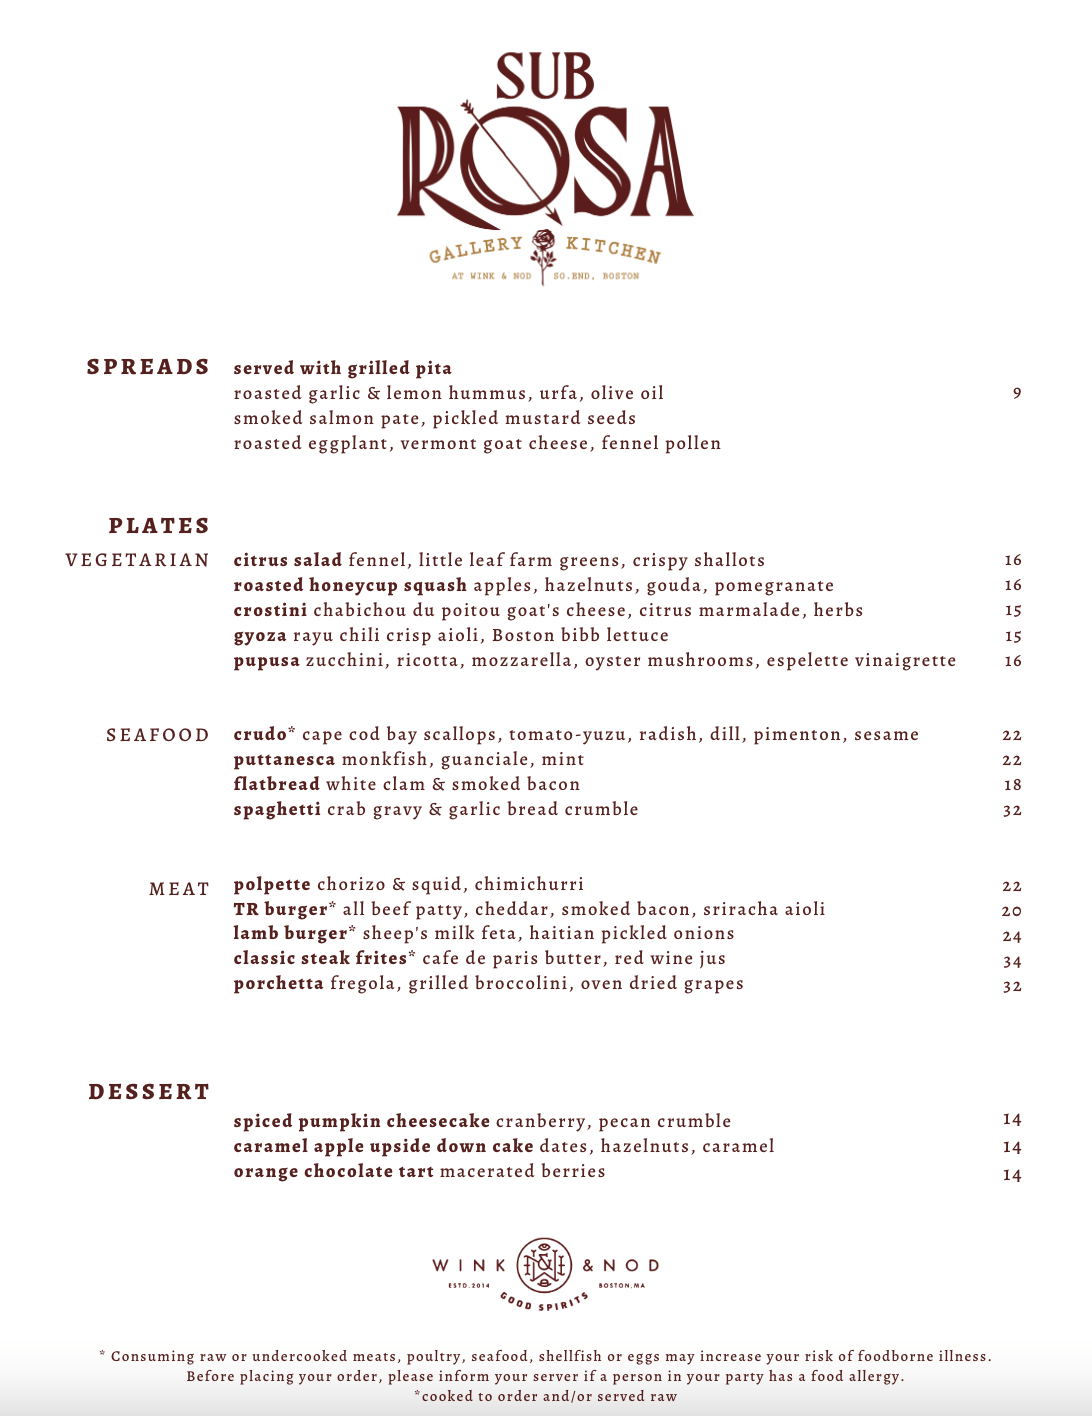 A page of a menu from a restaurant called SubRosa